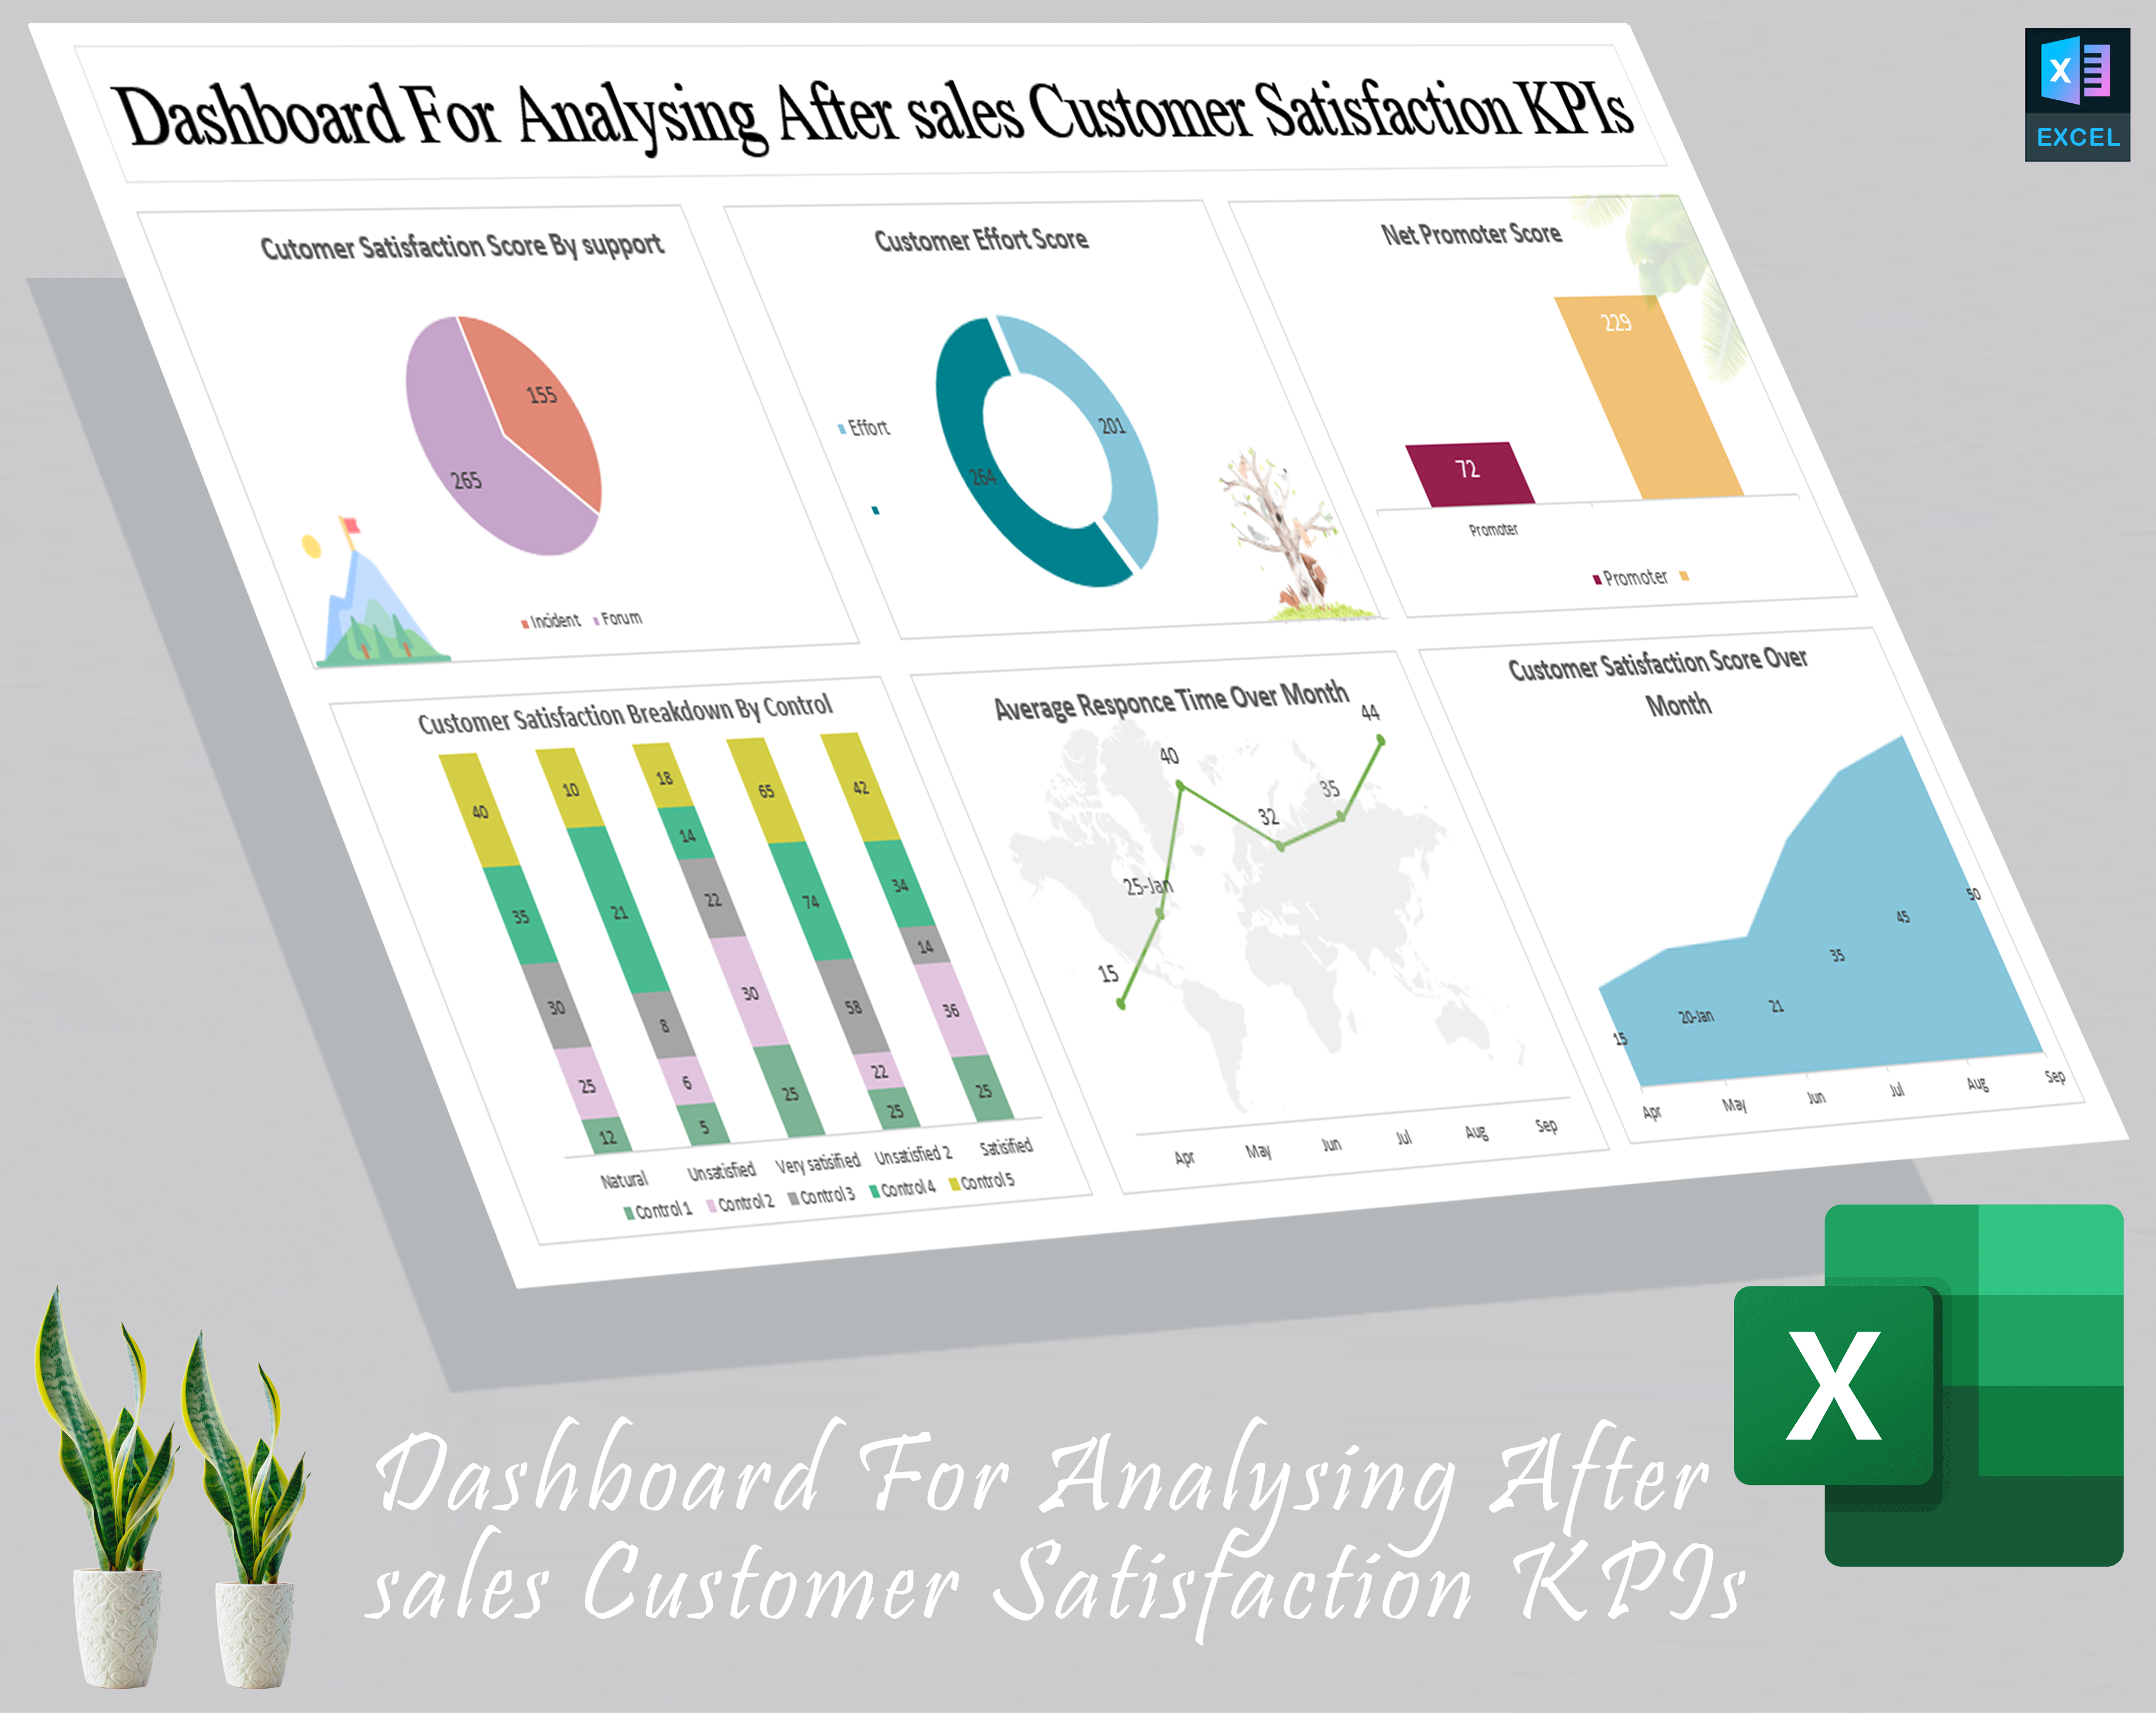 Dashboard For Analysing After sales Customer Satisfaction KPIs